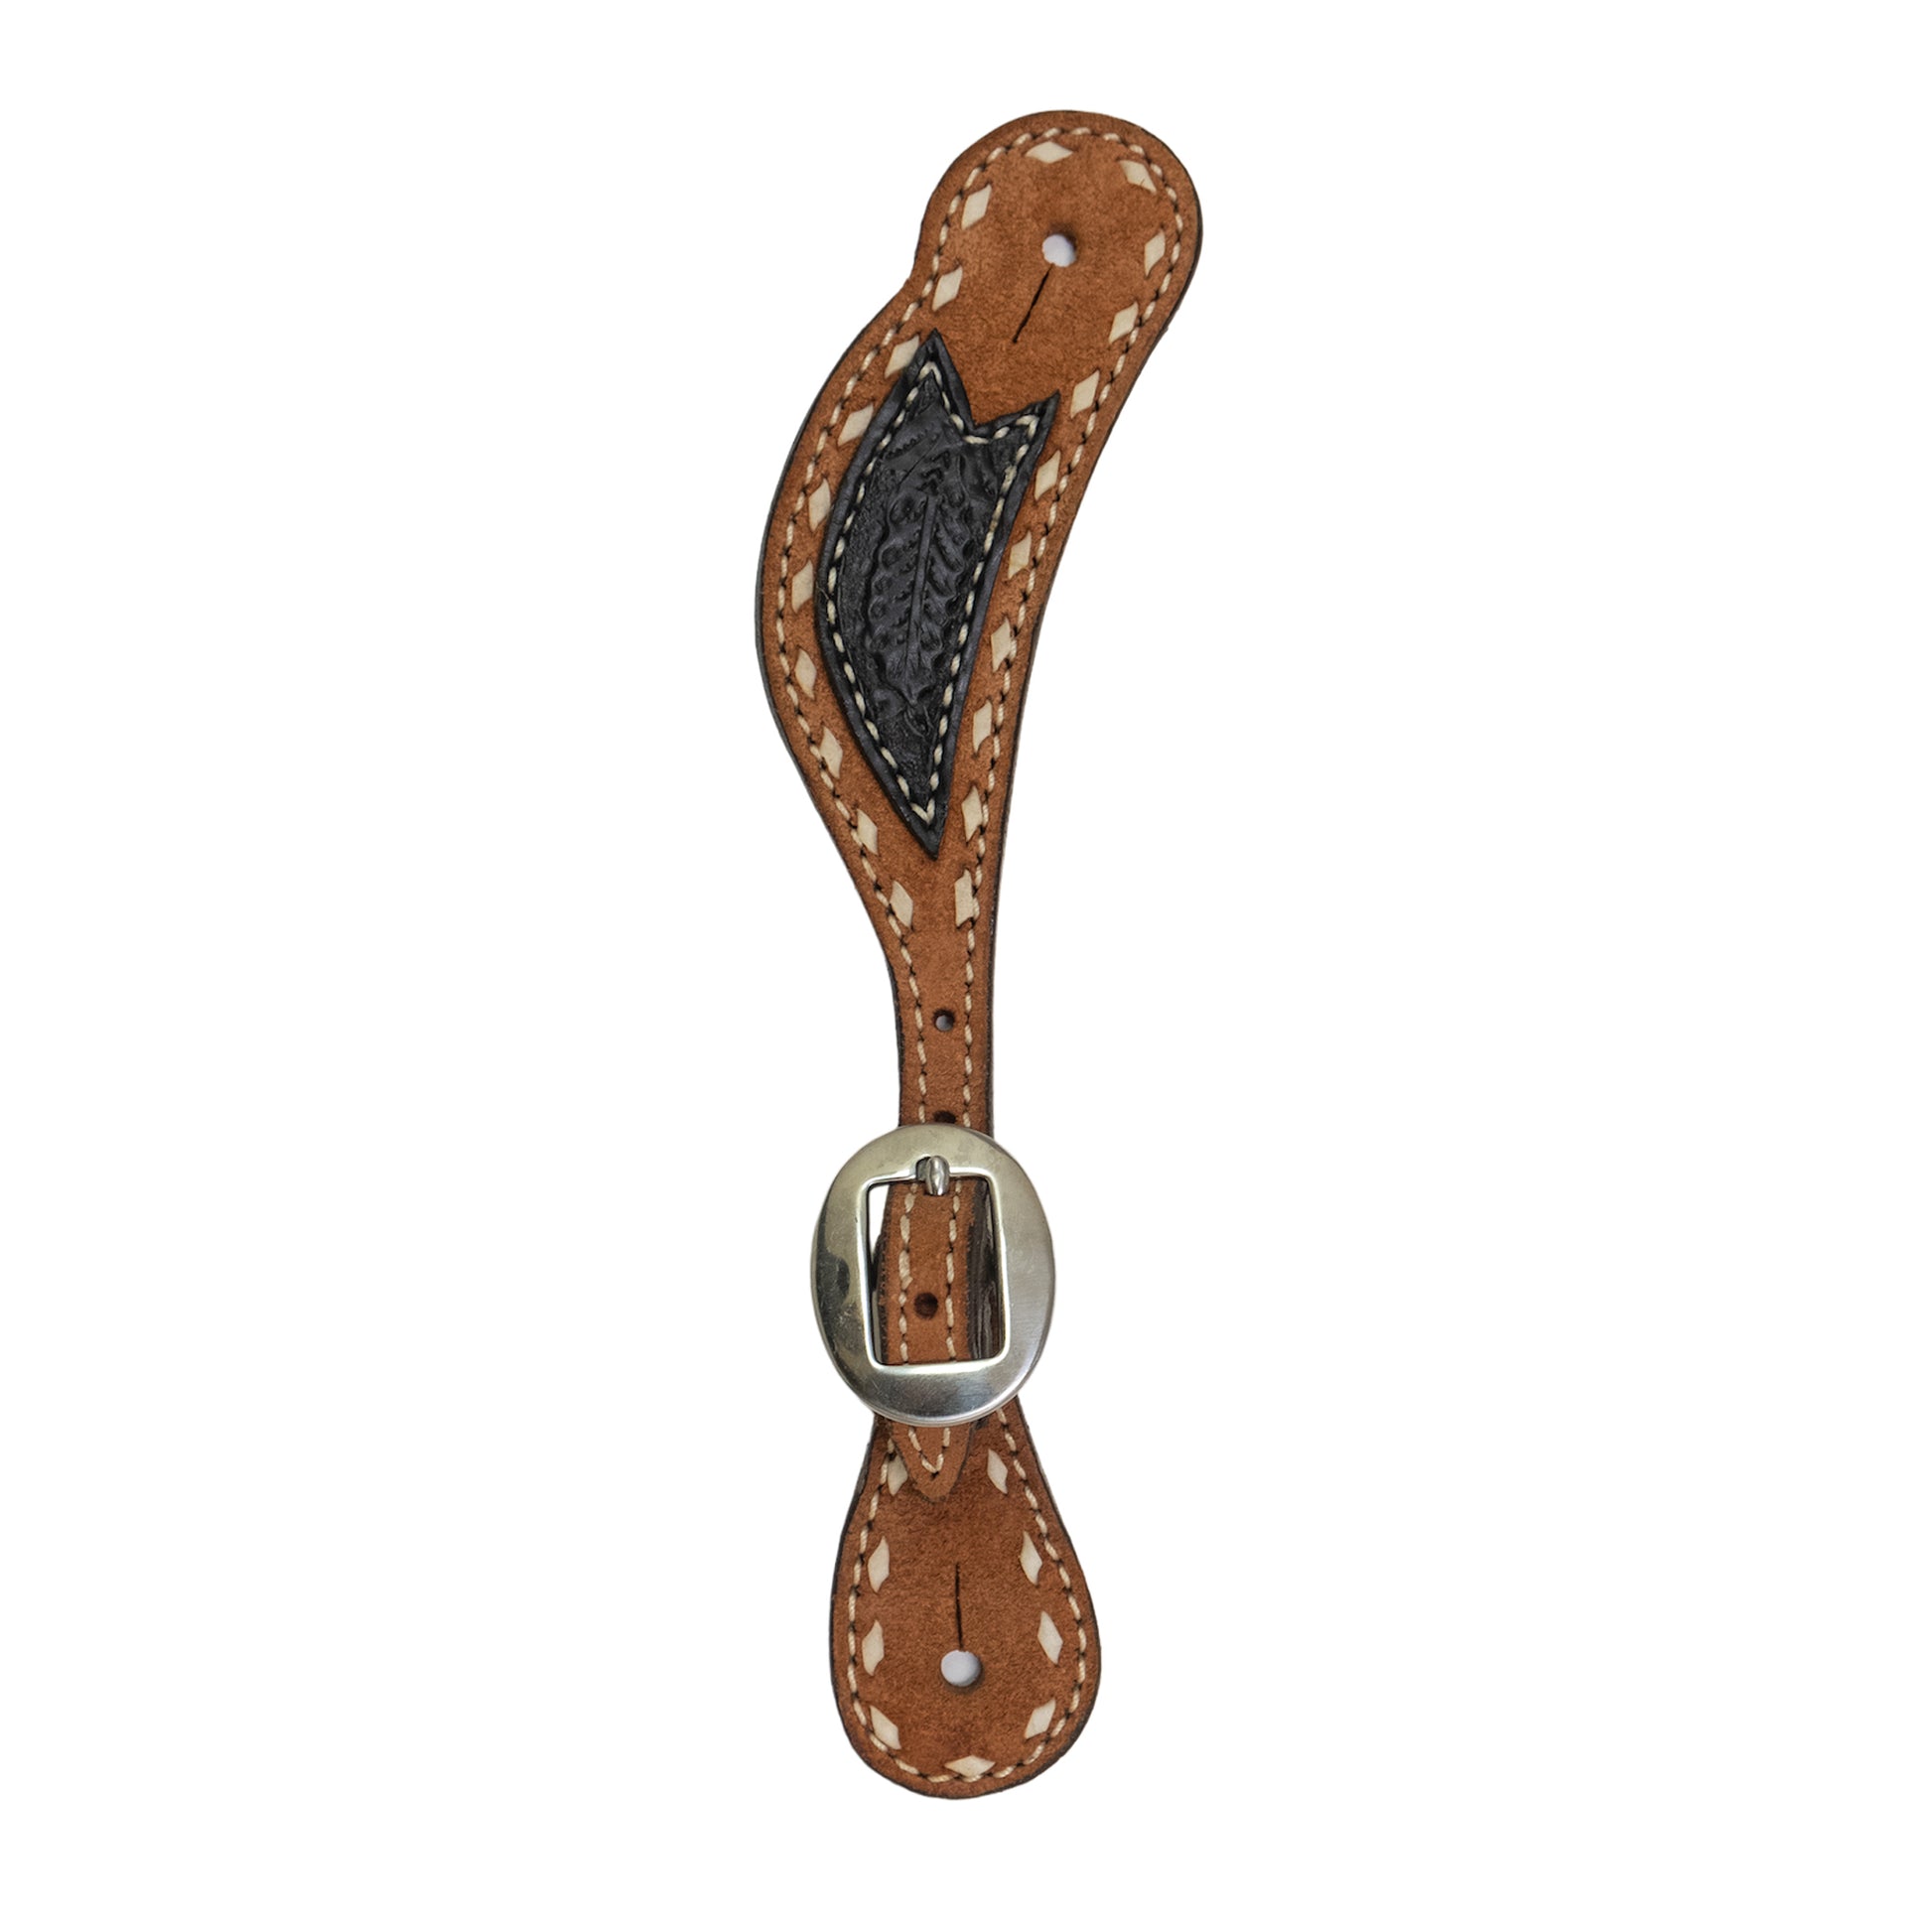 Ladies spur straps rough out toast leather with black oak leaf tooled patch and rawhide buckstitch. 